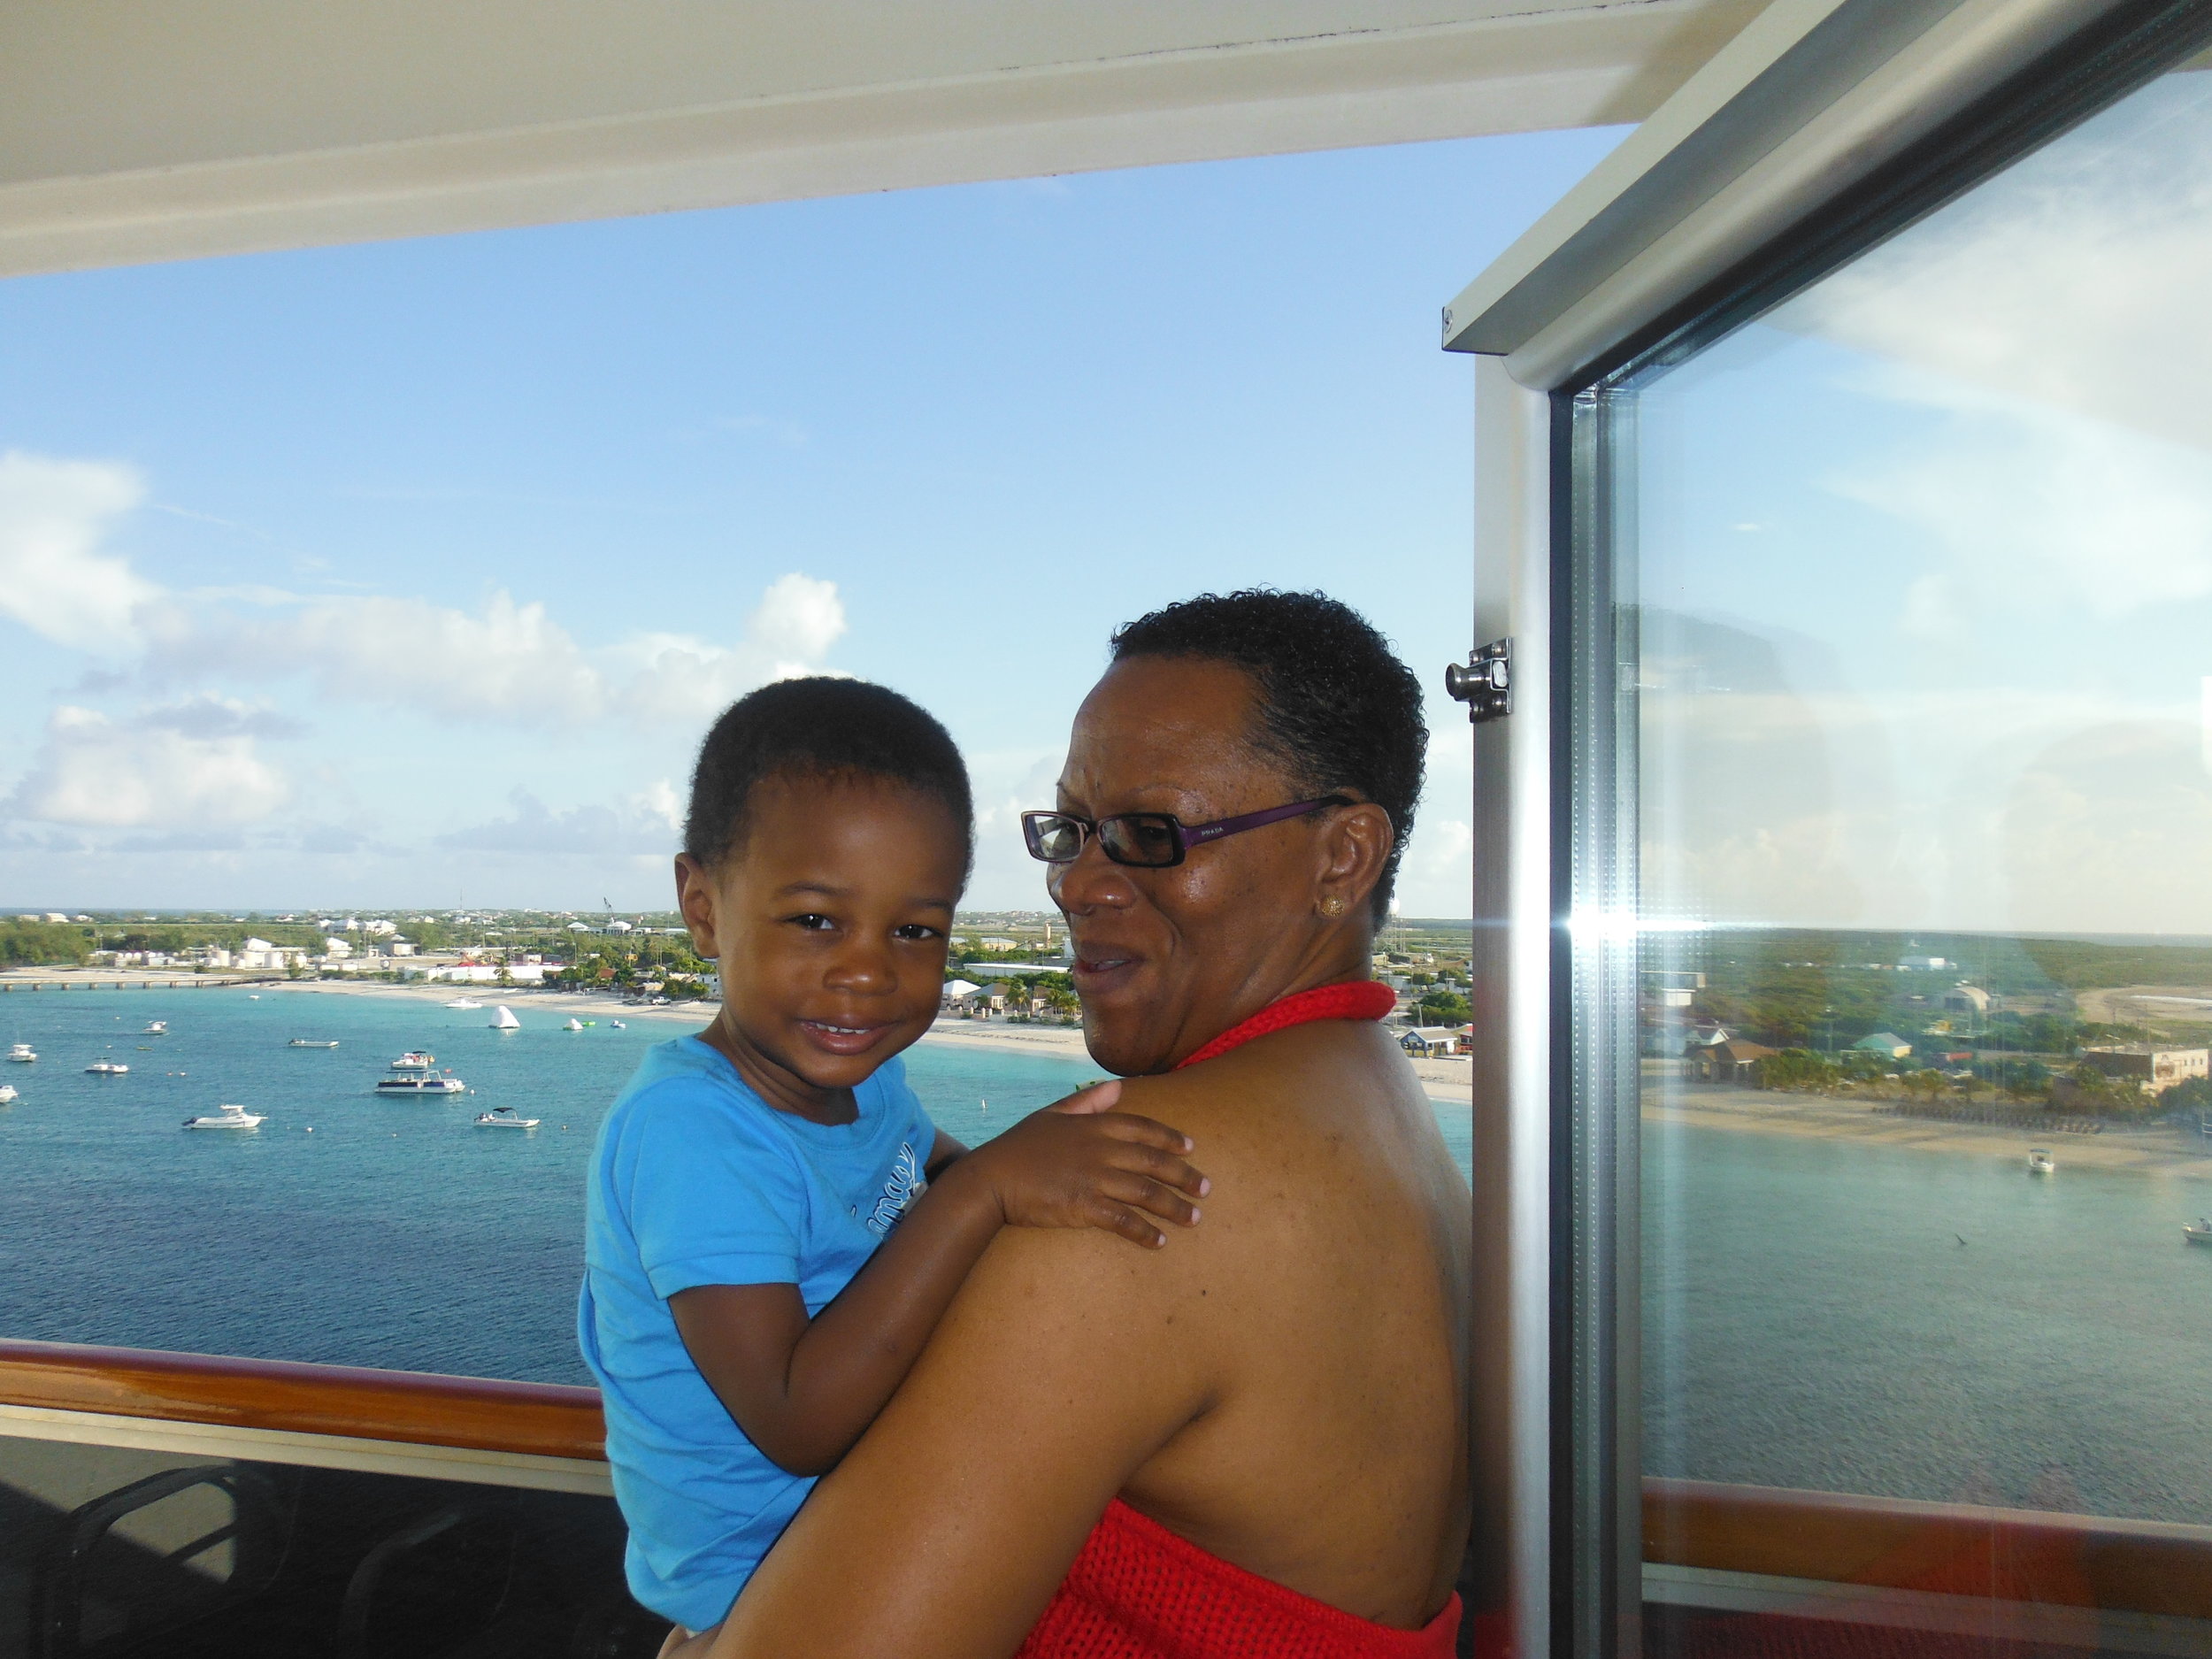 This Is Now: Grandma Comes Along And A Balcony Stateroom